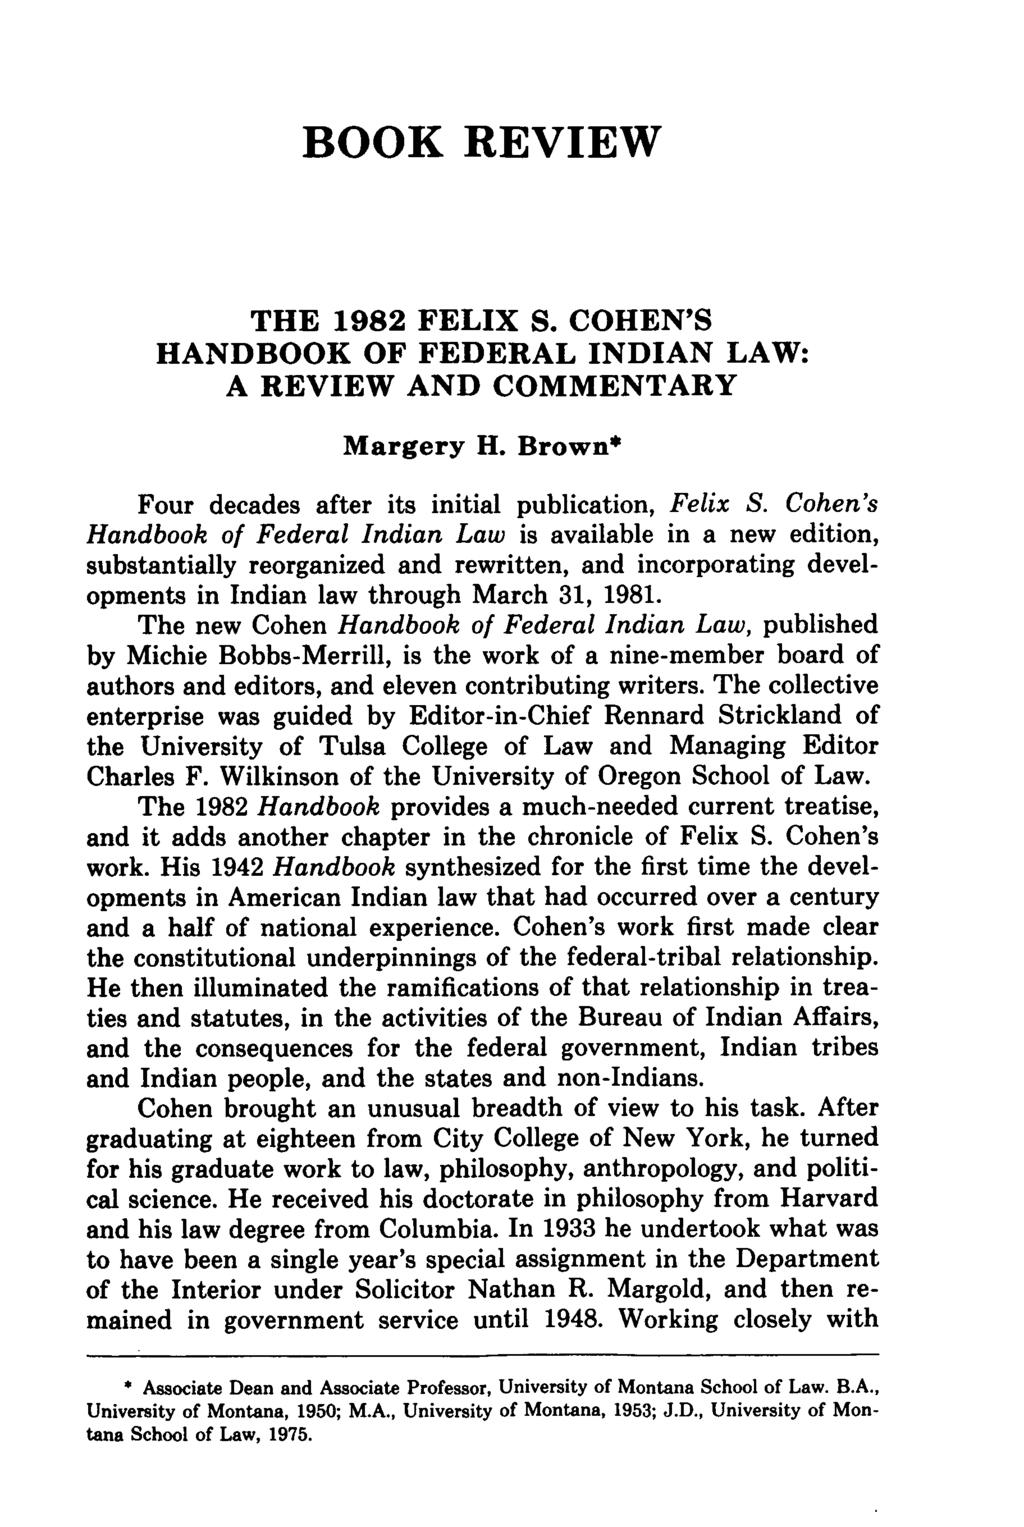 Brown: Felix S. Cohen BOOK REVIEW THE 1982 FELIX S. COHEN'S HANDBOOK OF FEDERAL INDIAN LAW: A REVIEW AND COMMENTARY Margery H. Brown* Four decades after its initial publication, Felix S.